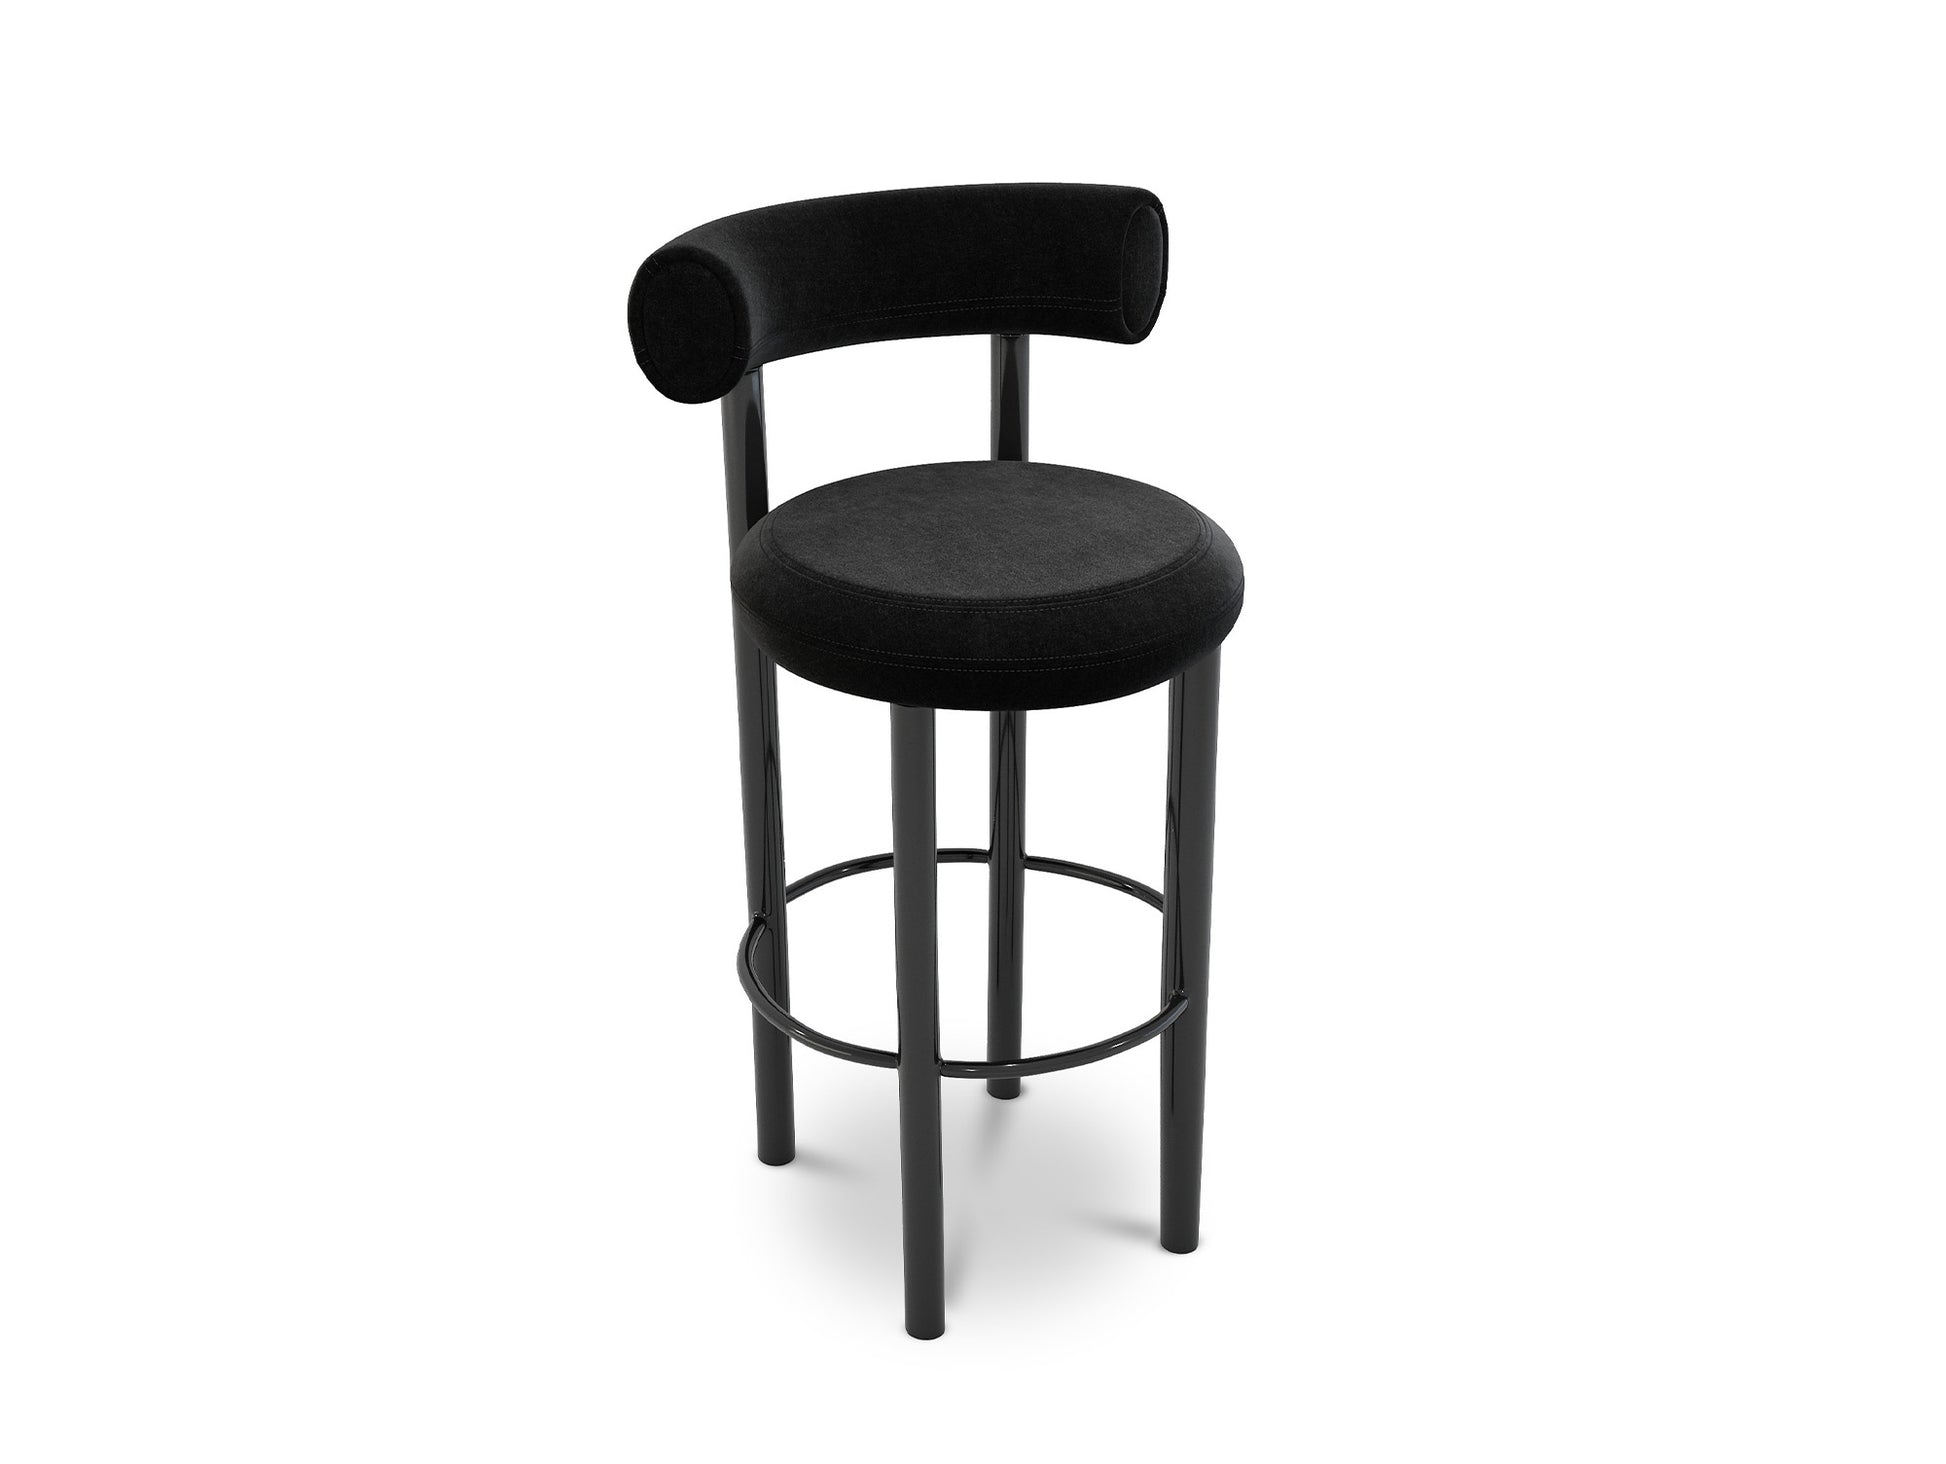 Fat Bar/Counter Stool by Tom Dixon - Gentle 2 193